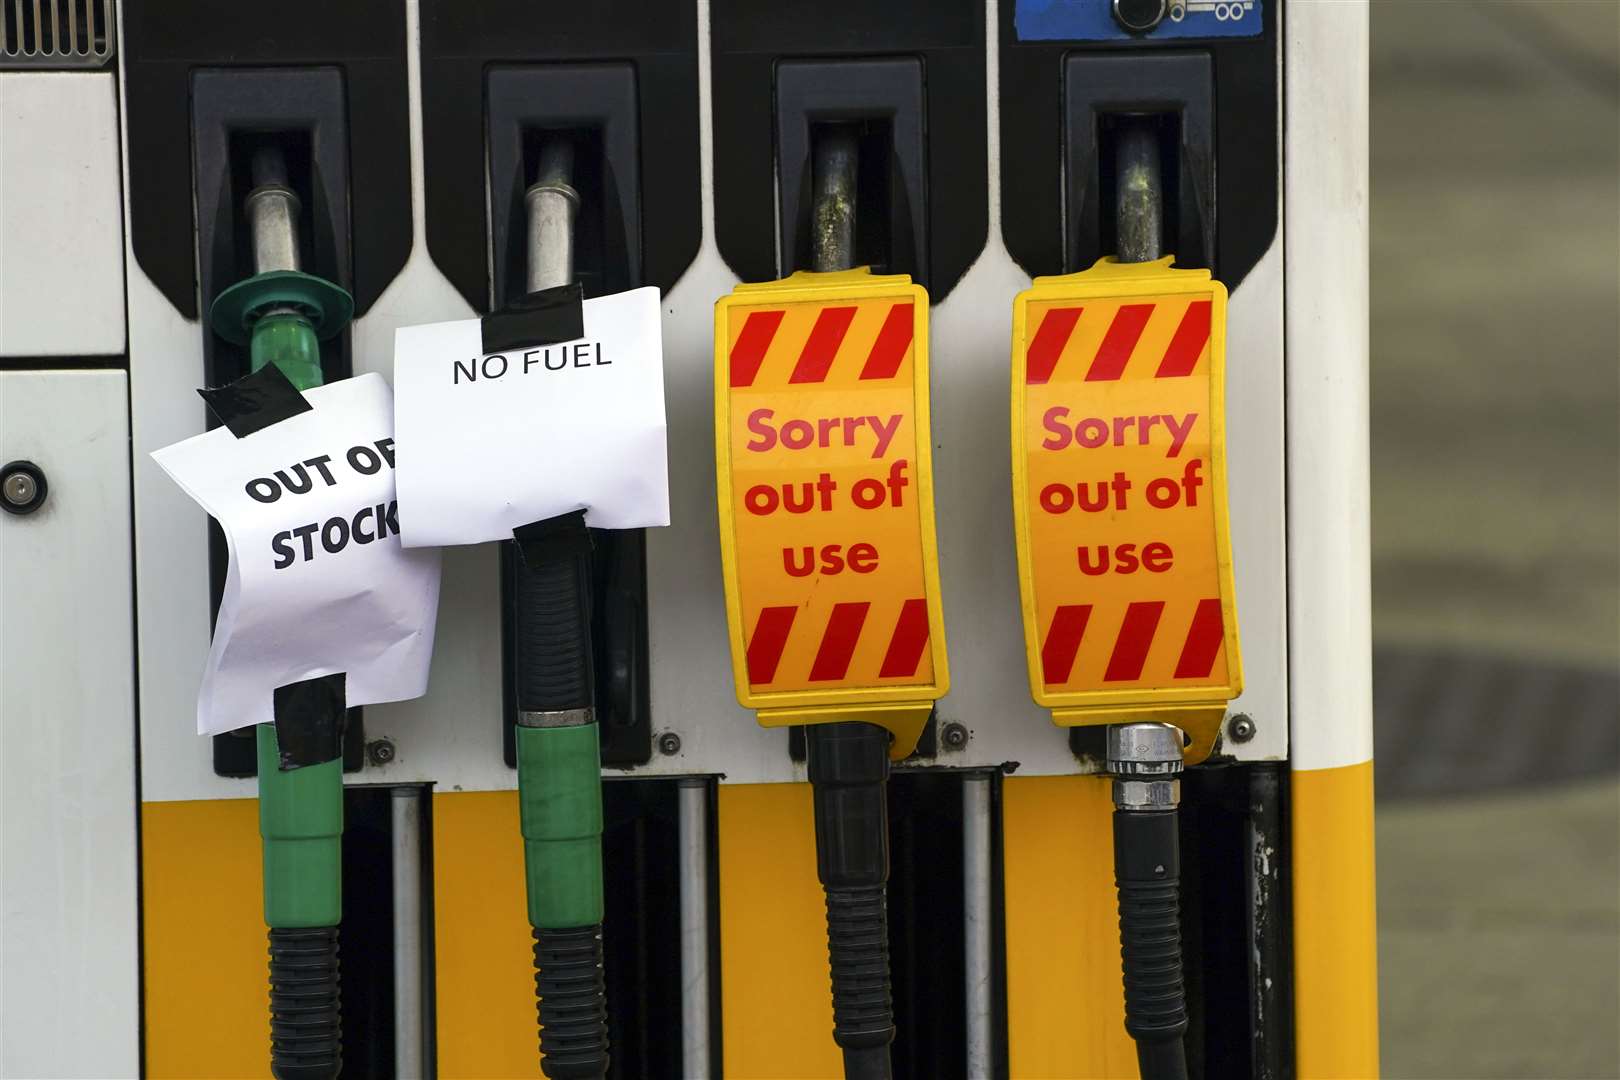 Thousands of petrol stations across the UK are out of fuel, according to an industry body (Steve Parsons/PA)